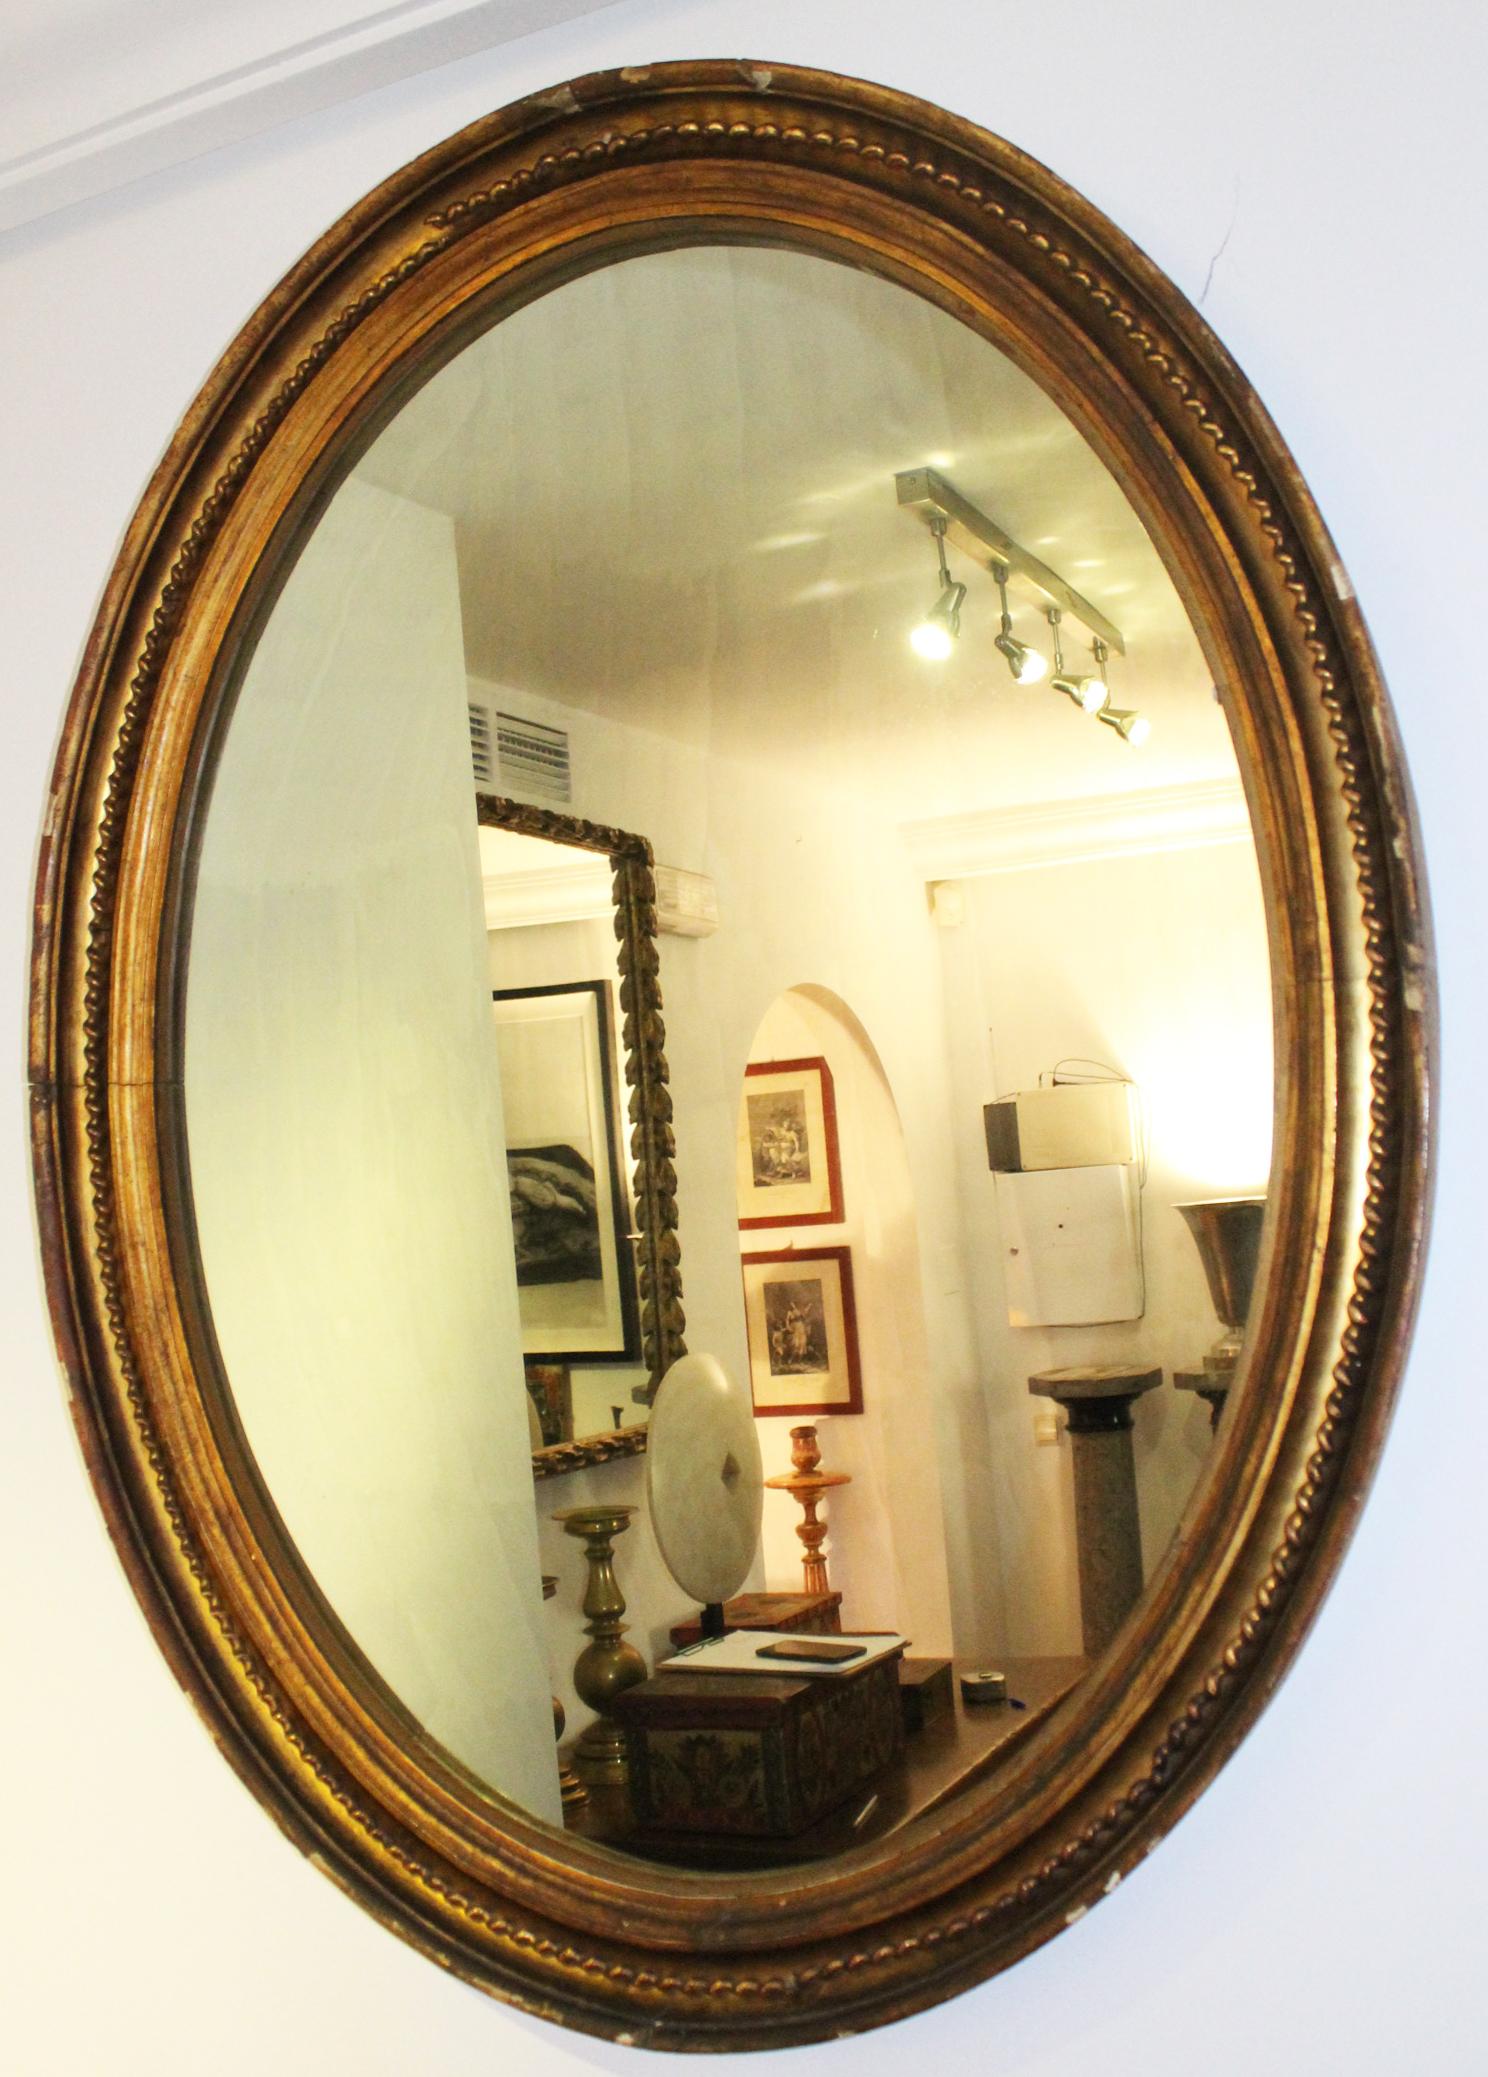 19th century French oval mirror gilded with gold leaf.